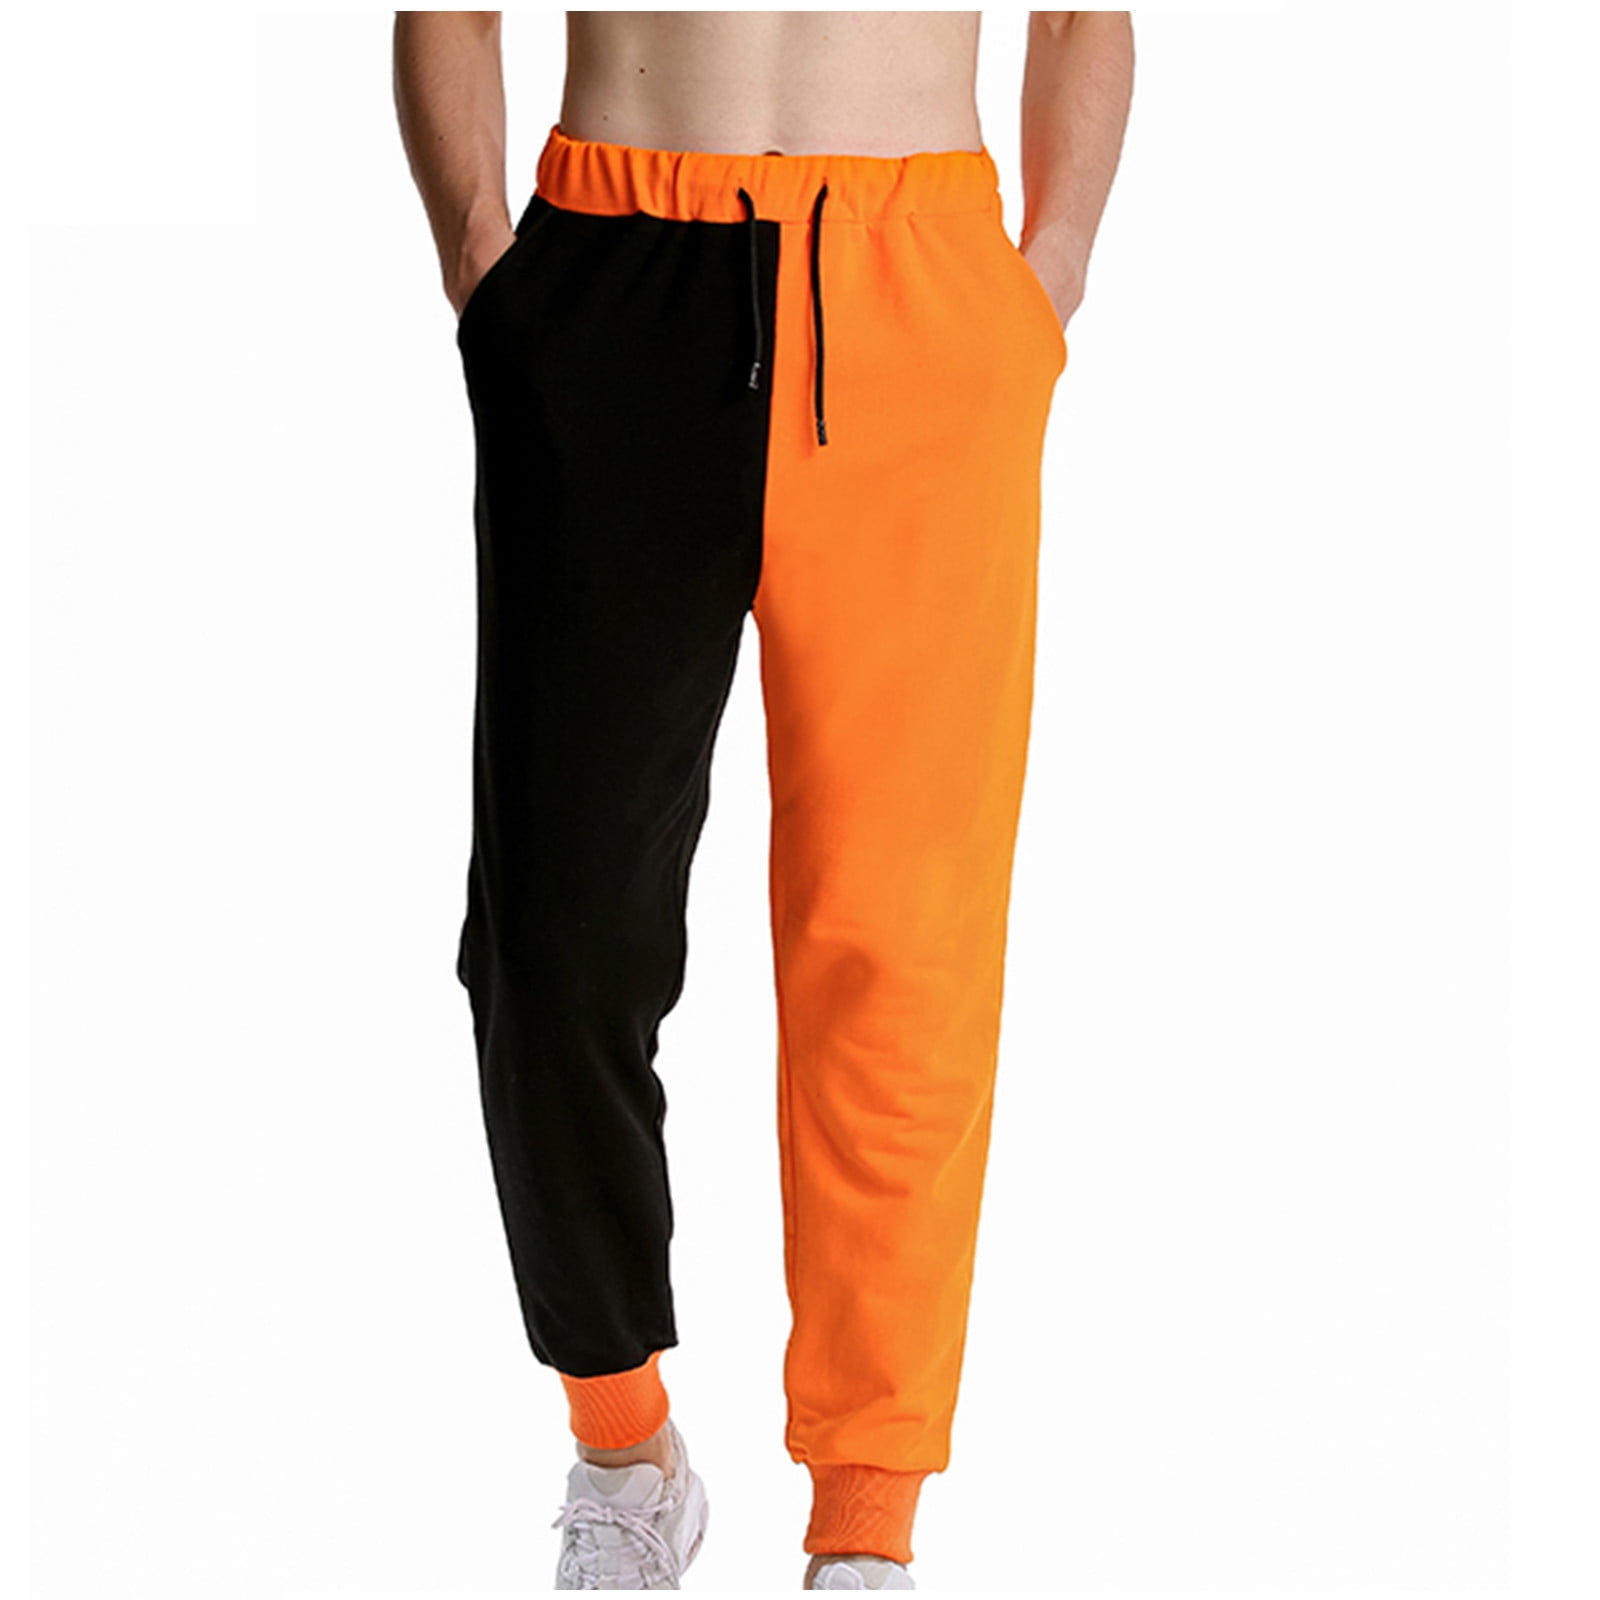 HSMQHJWE Gallery Dept Pants Track Pants Zipper Pants Tights Solid Stretch  Line Quick Running Training Men Breathable Pants Color Design Men's Pants  Stocking Gift Boy 